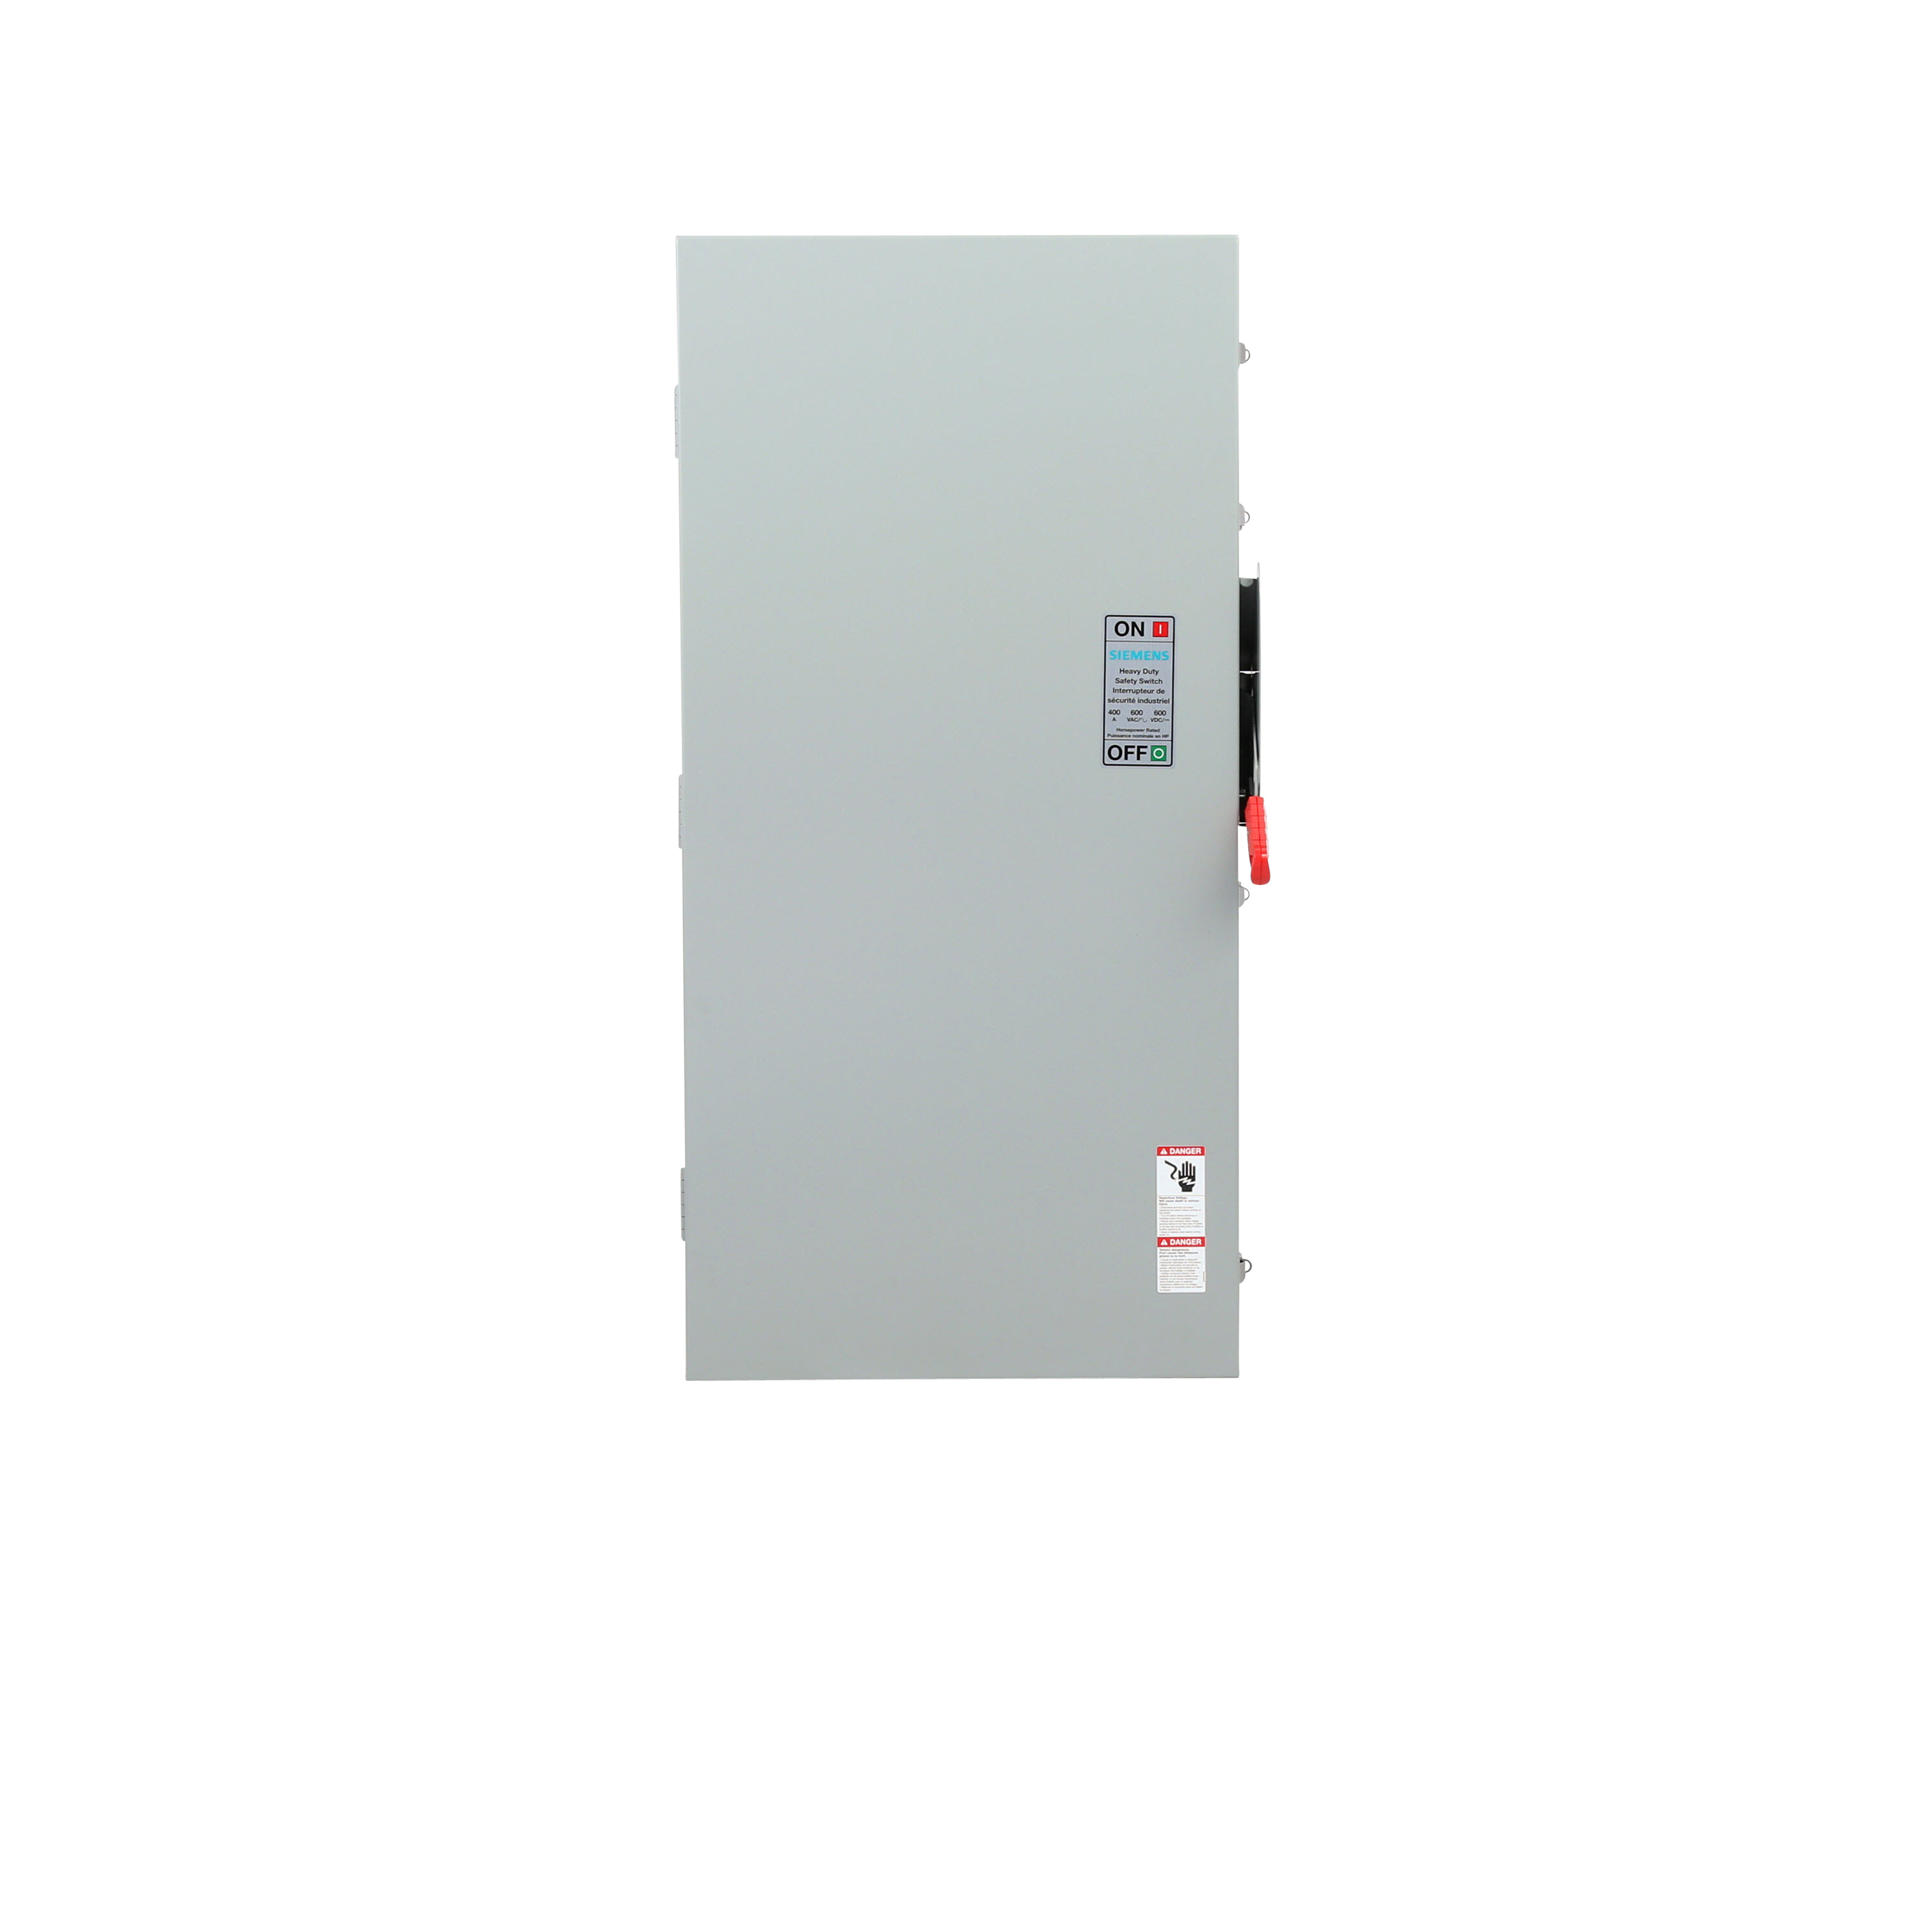 Siemens Low Voltage Circuit Protection Heavy Duty Safety Switch. 3-Pole 3-Fuse Fused in a type 12 industrial enclosure. Rated 600VAC (400A).